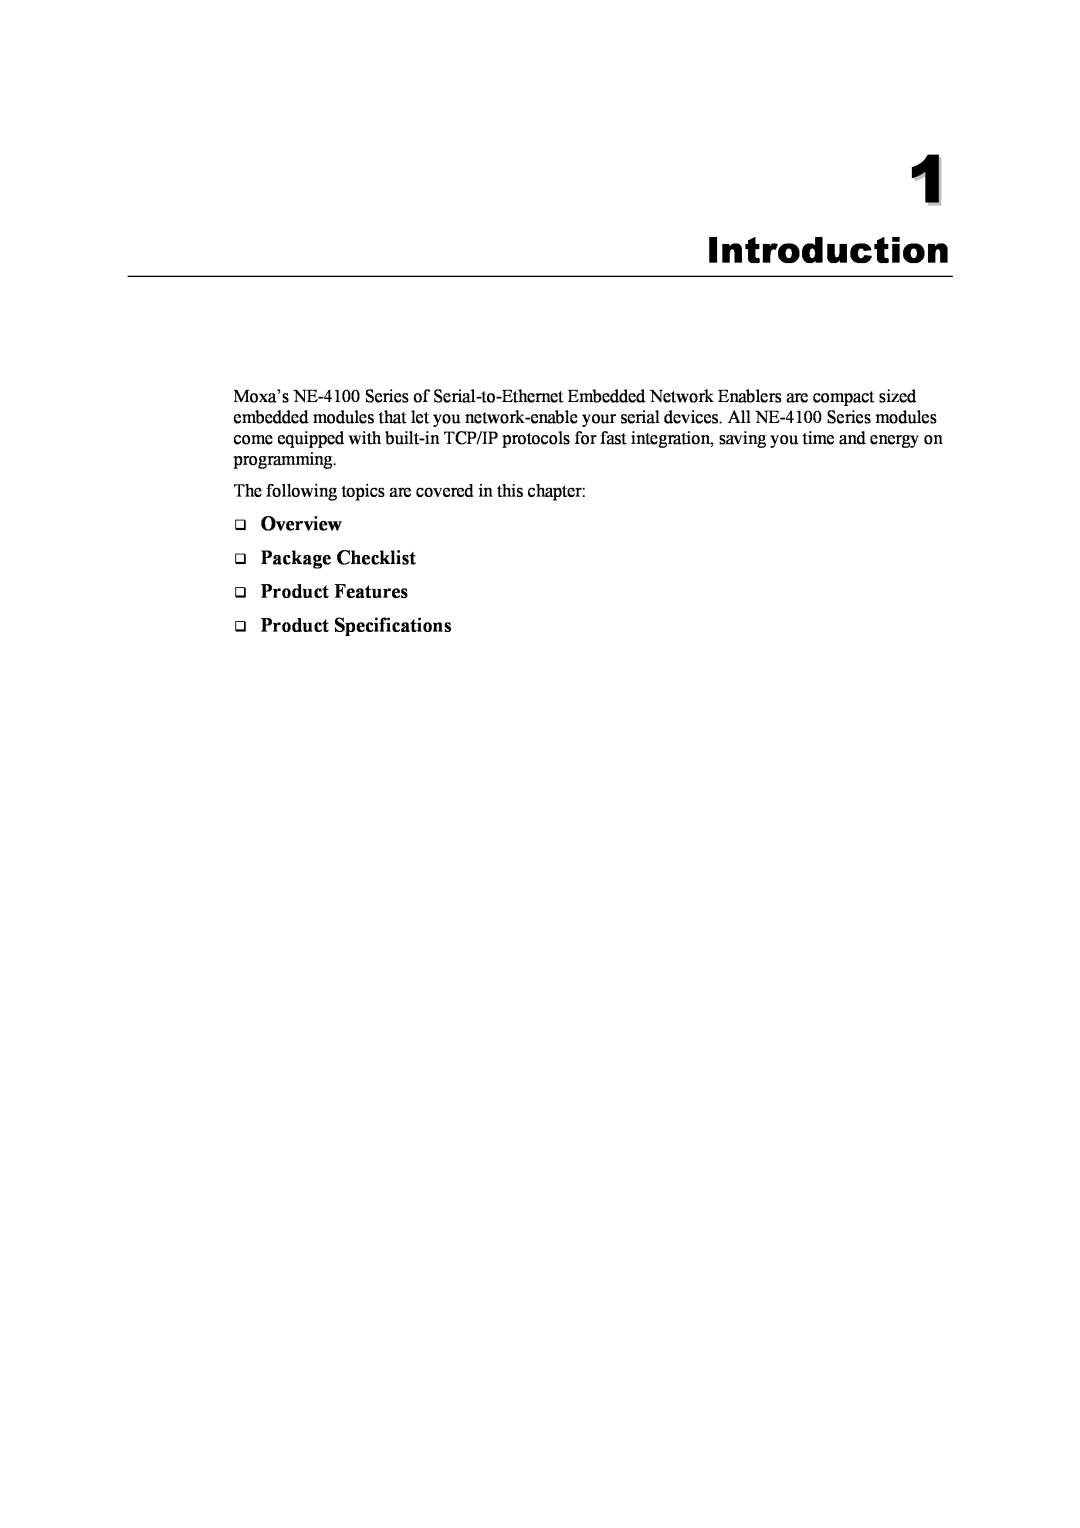 Moxa Technologies NE-4100 user manual Introduction, Overview Package Checklist Product Features Product Specifications 